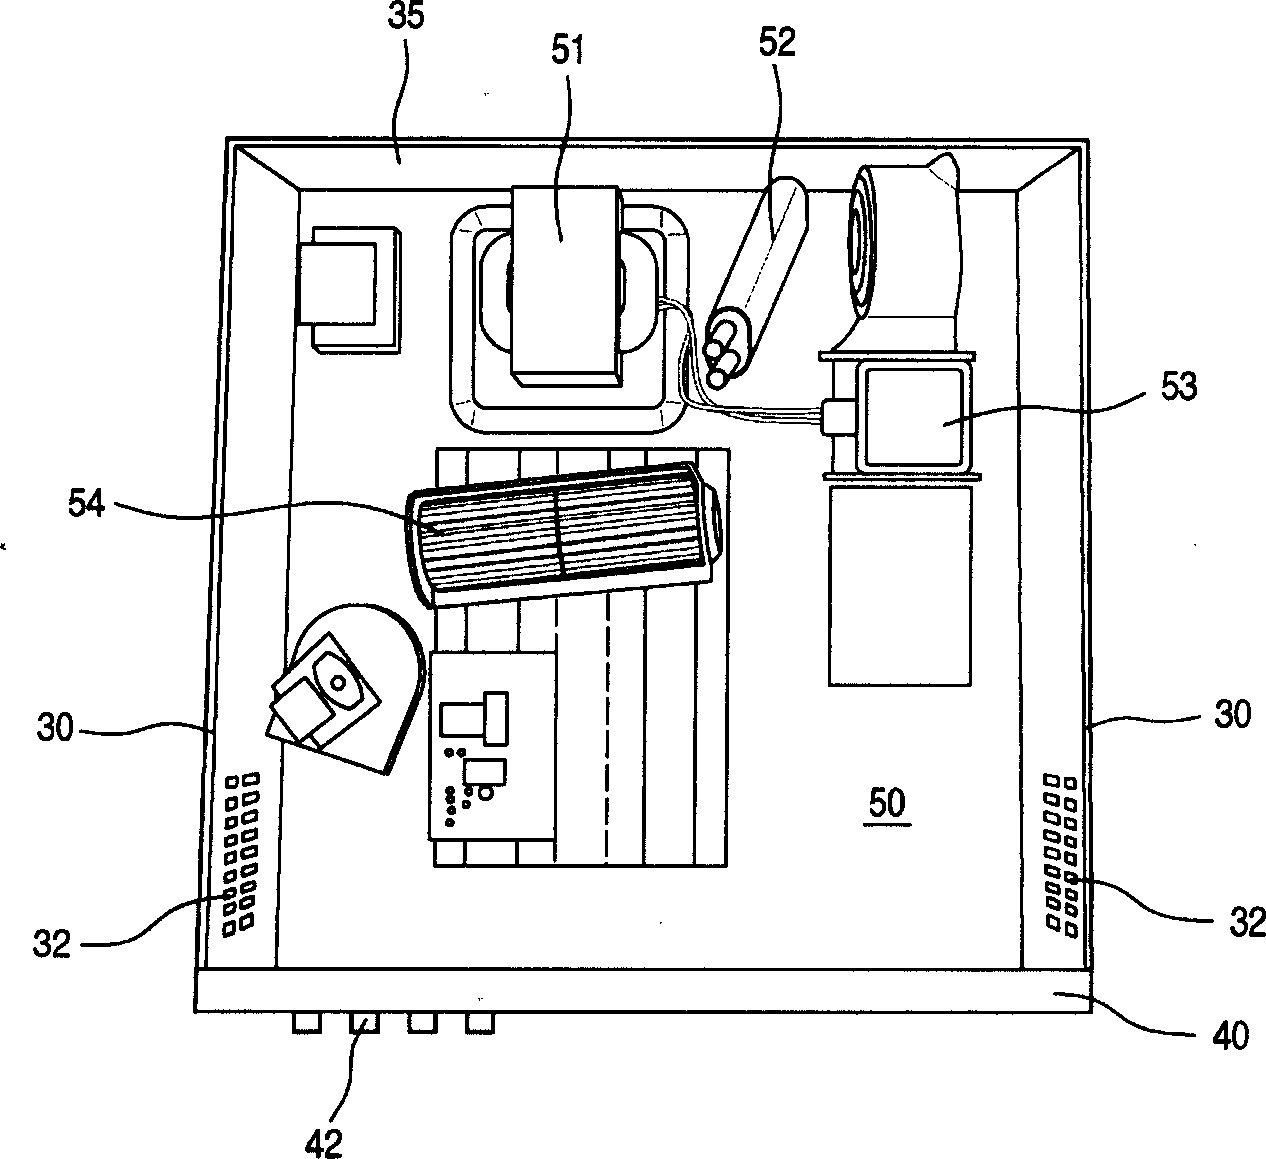 Electric coutrol chamber cooling system for electric oven